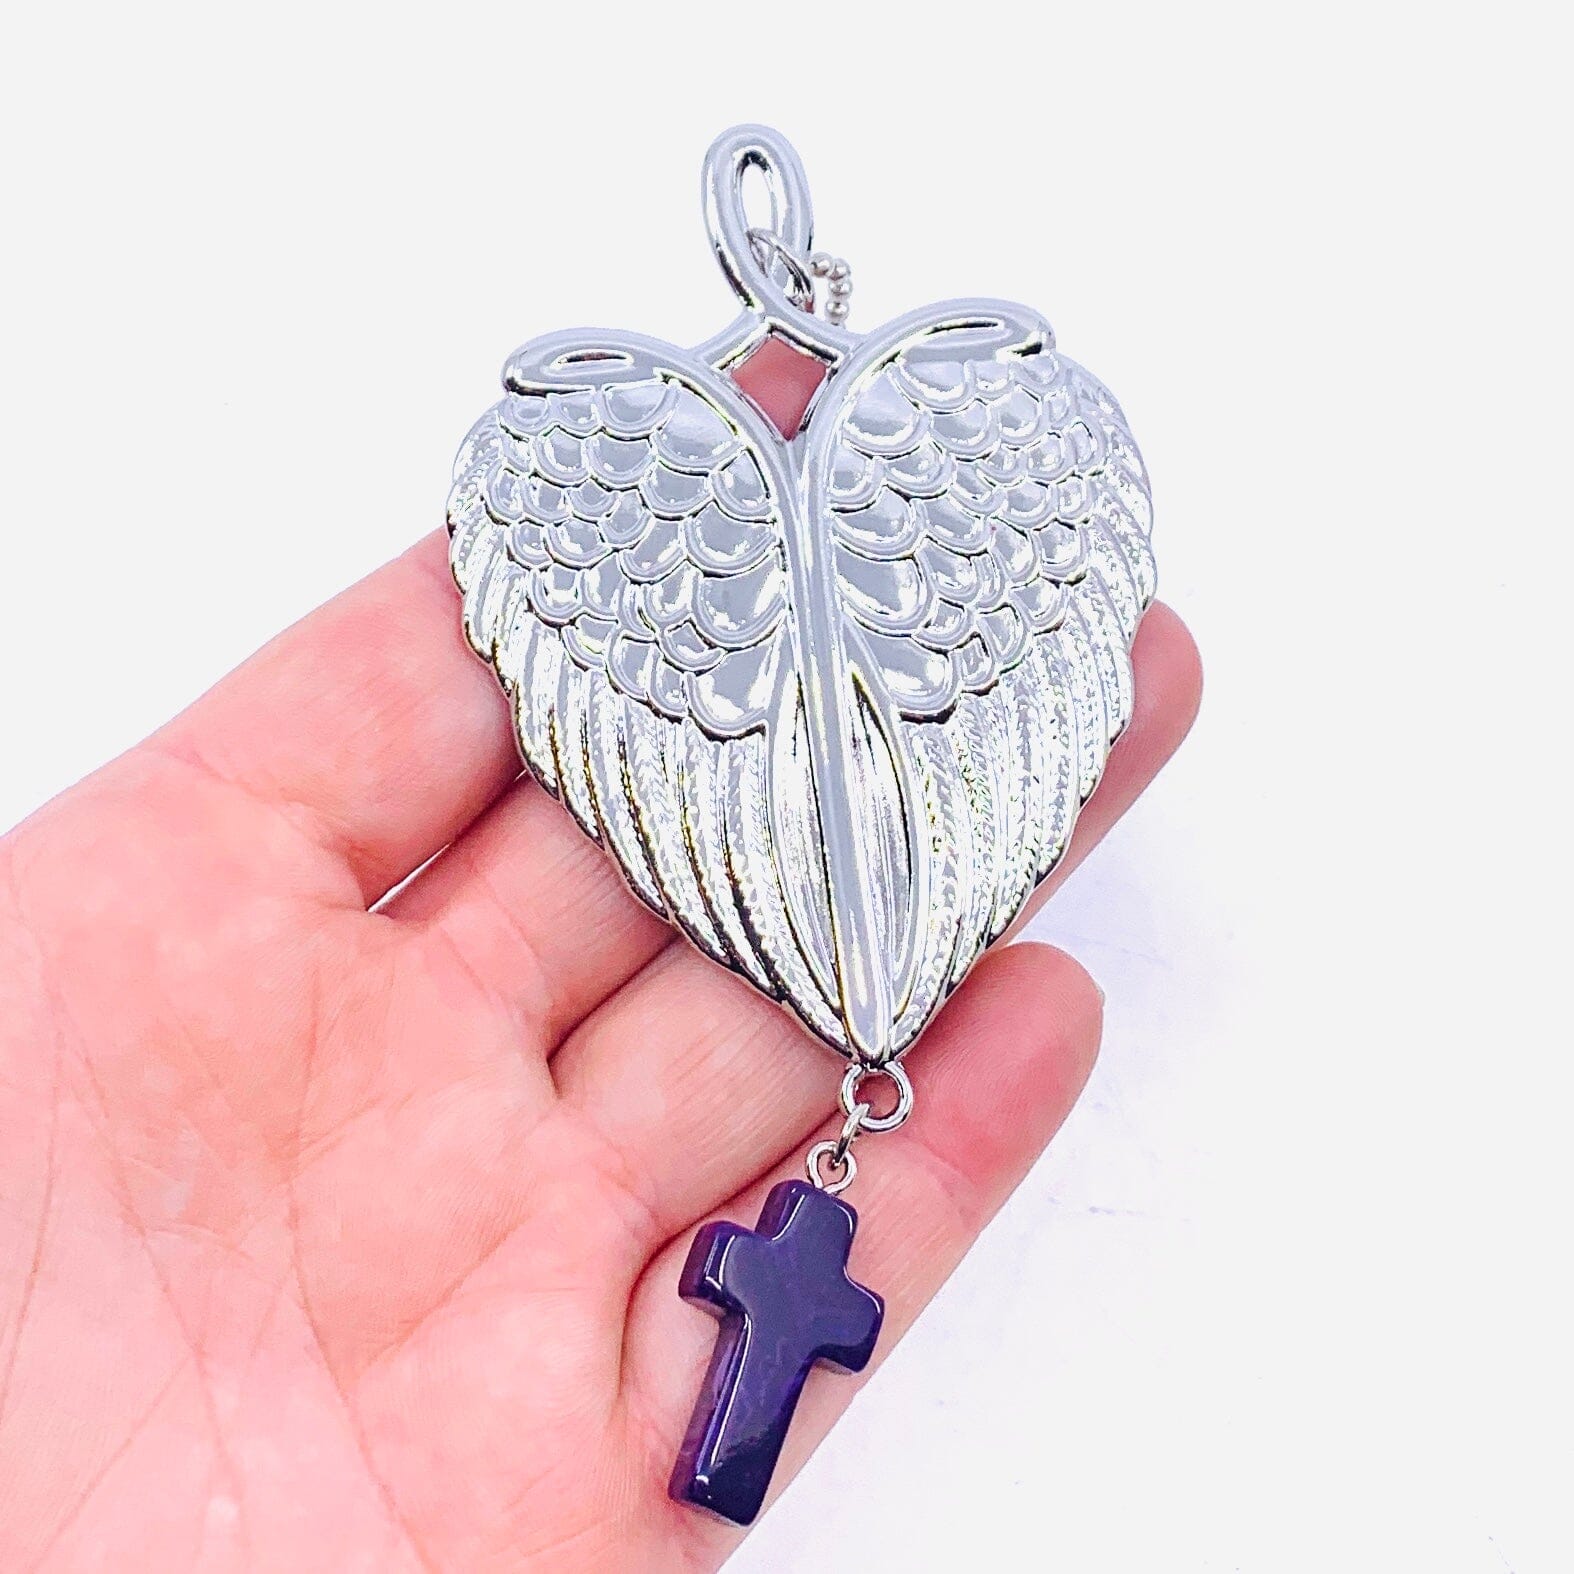 Wings of Inspiration Car Charm, Bless and Protect us All Ornament GANZ 